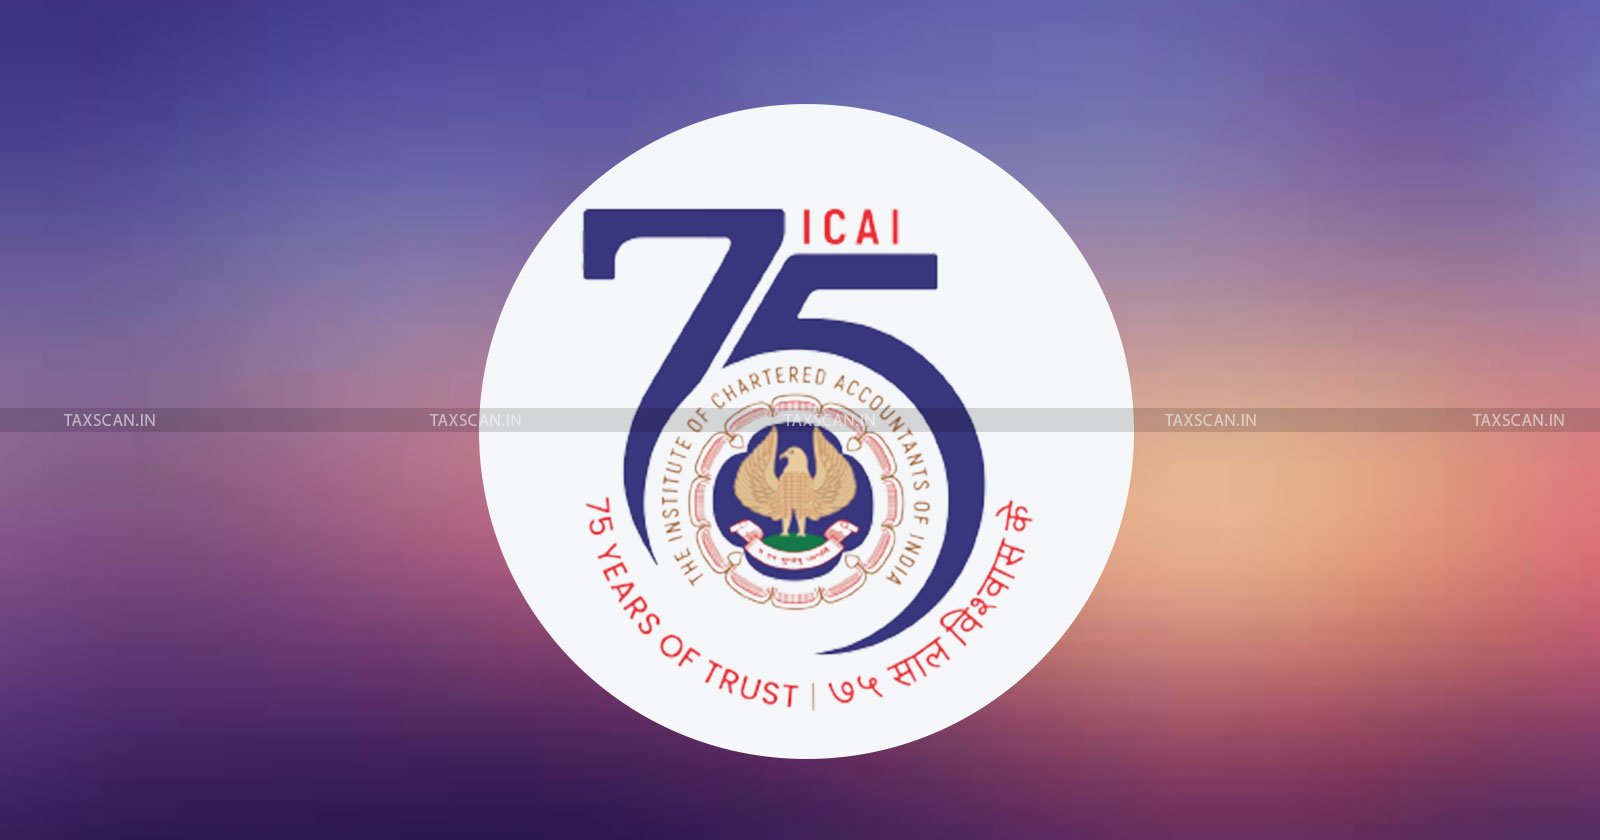 ICAI Introduces New Logo - Celebrate Start of 75th Year on Eve of CA Day -75th Year on Eve of CA Day -Celebrate Start of 75th Year - ICAI Introduces New Logo - taxscan